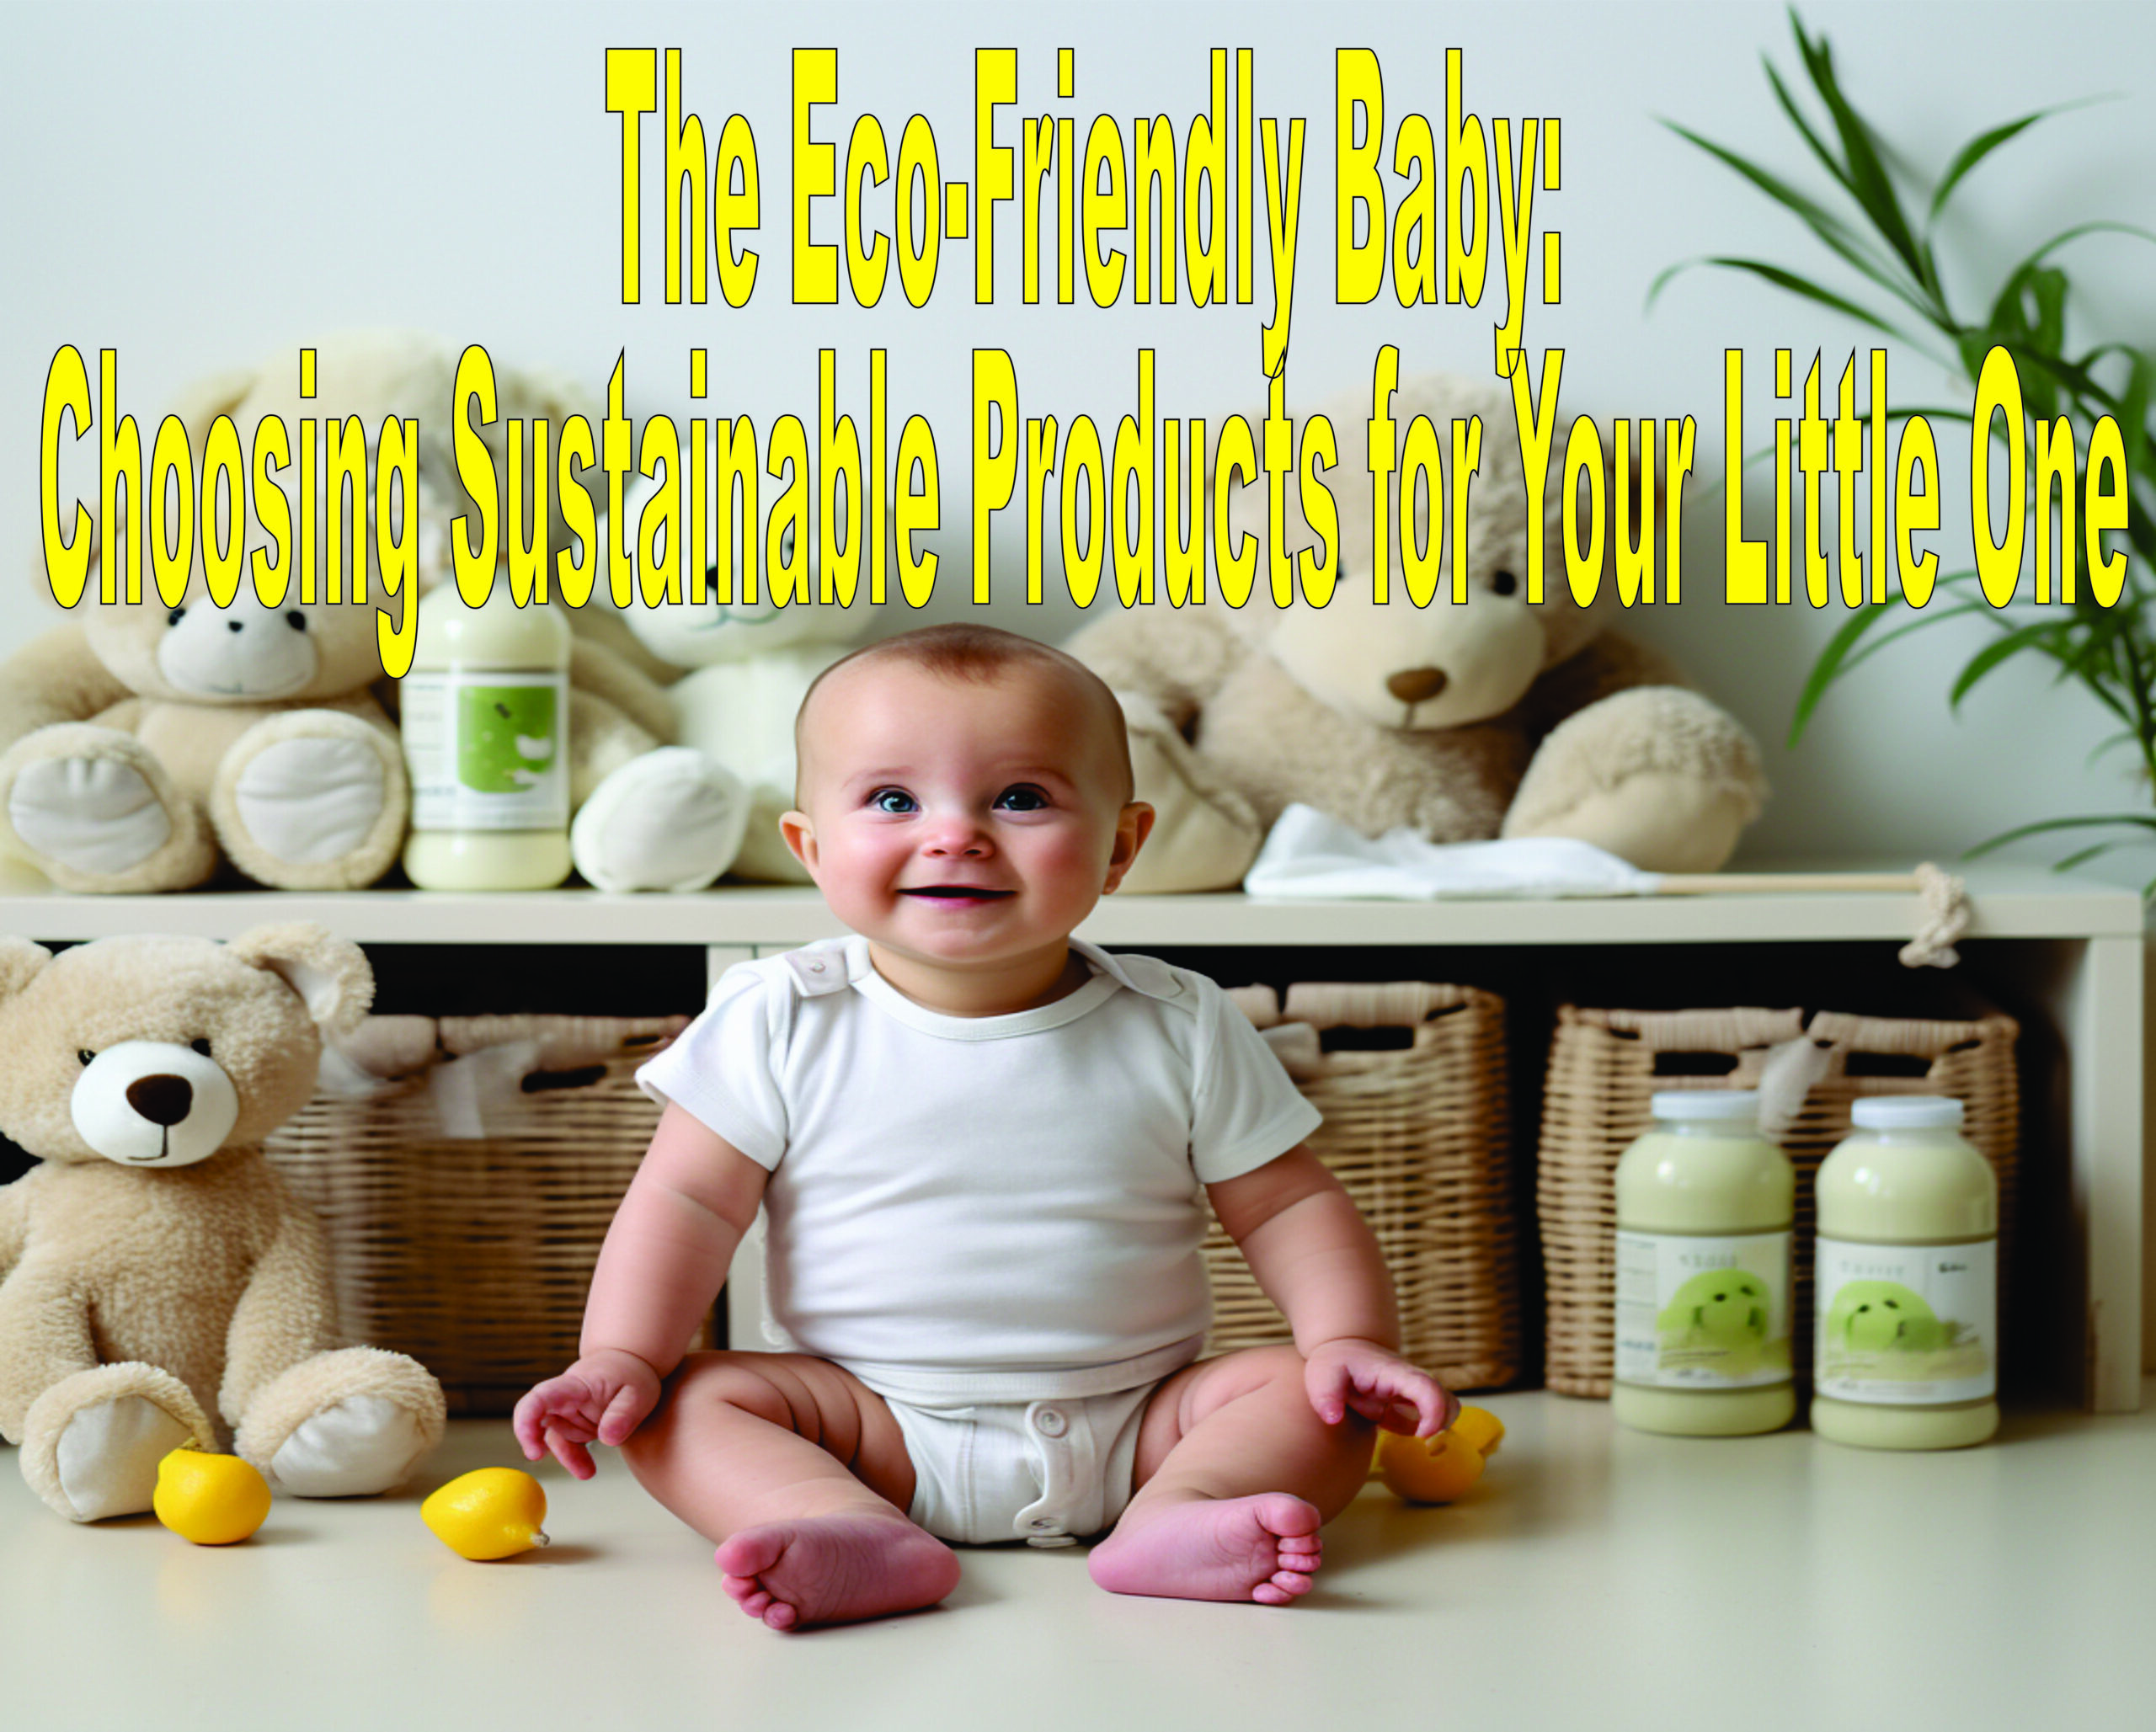 The Eco Friendly Baby Choosing Sustainable Products For Your Little One